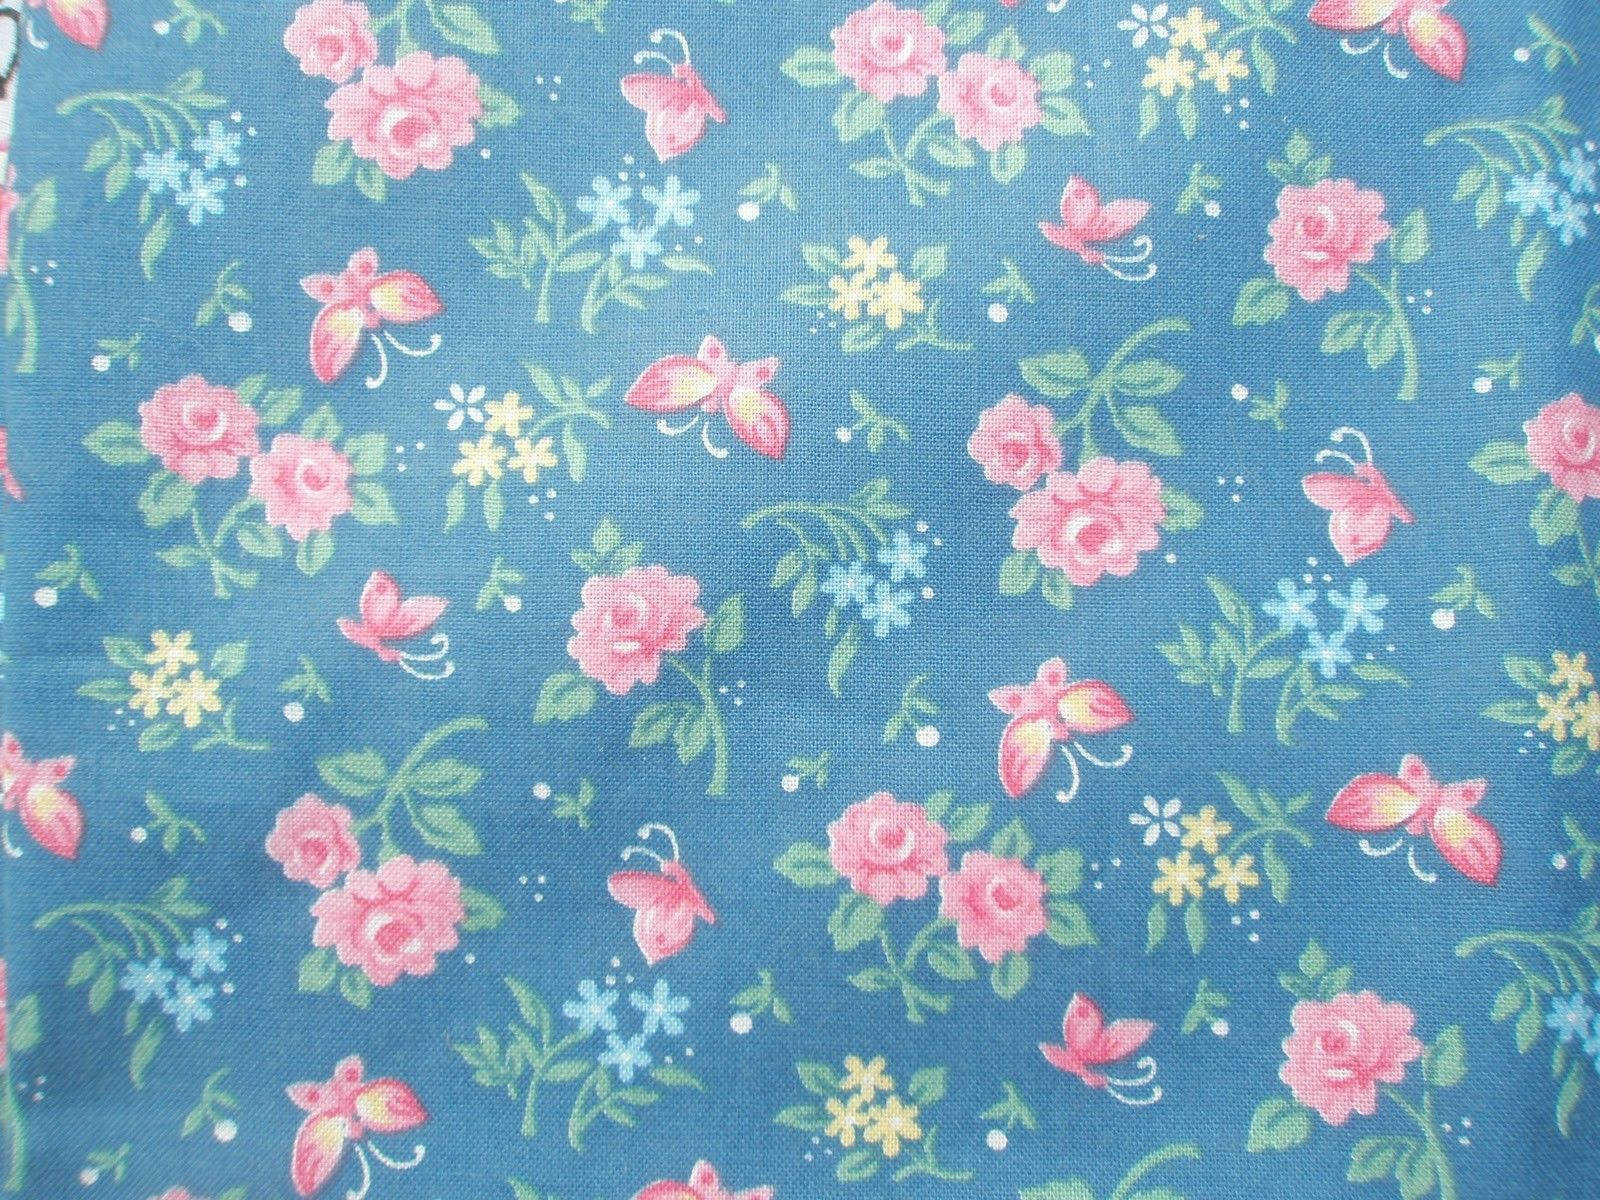 Cute Girly Floral Background